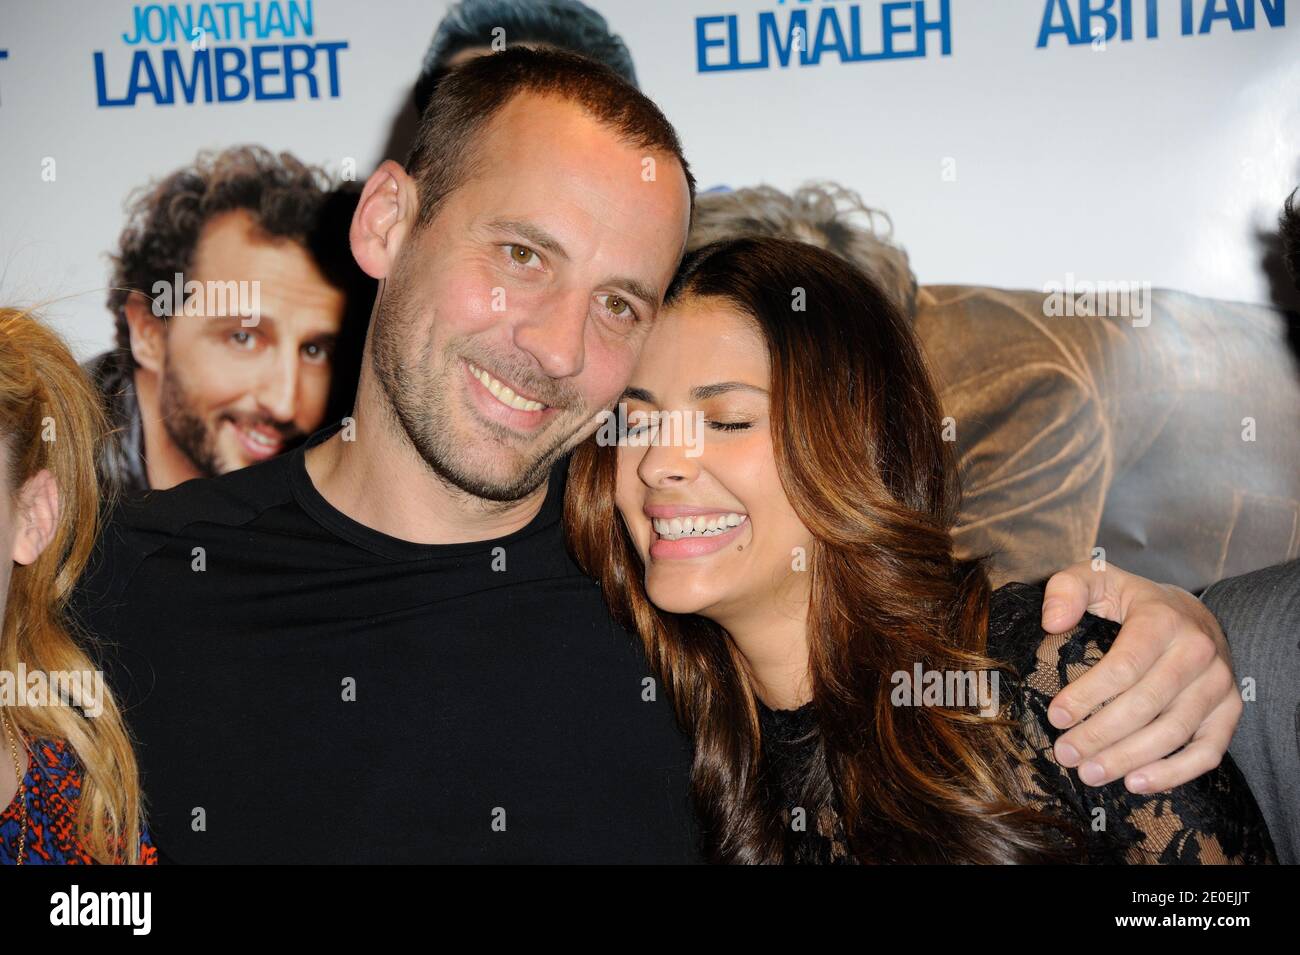 Fred Testot and Gyselle Soares attending the premiere of 'Depression et des Potes' at UGC Les Halles theater, in Paris, France on April 26, 2012. Photo by Alban Wyters/ABACAPRESS.COM Stock Photo